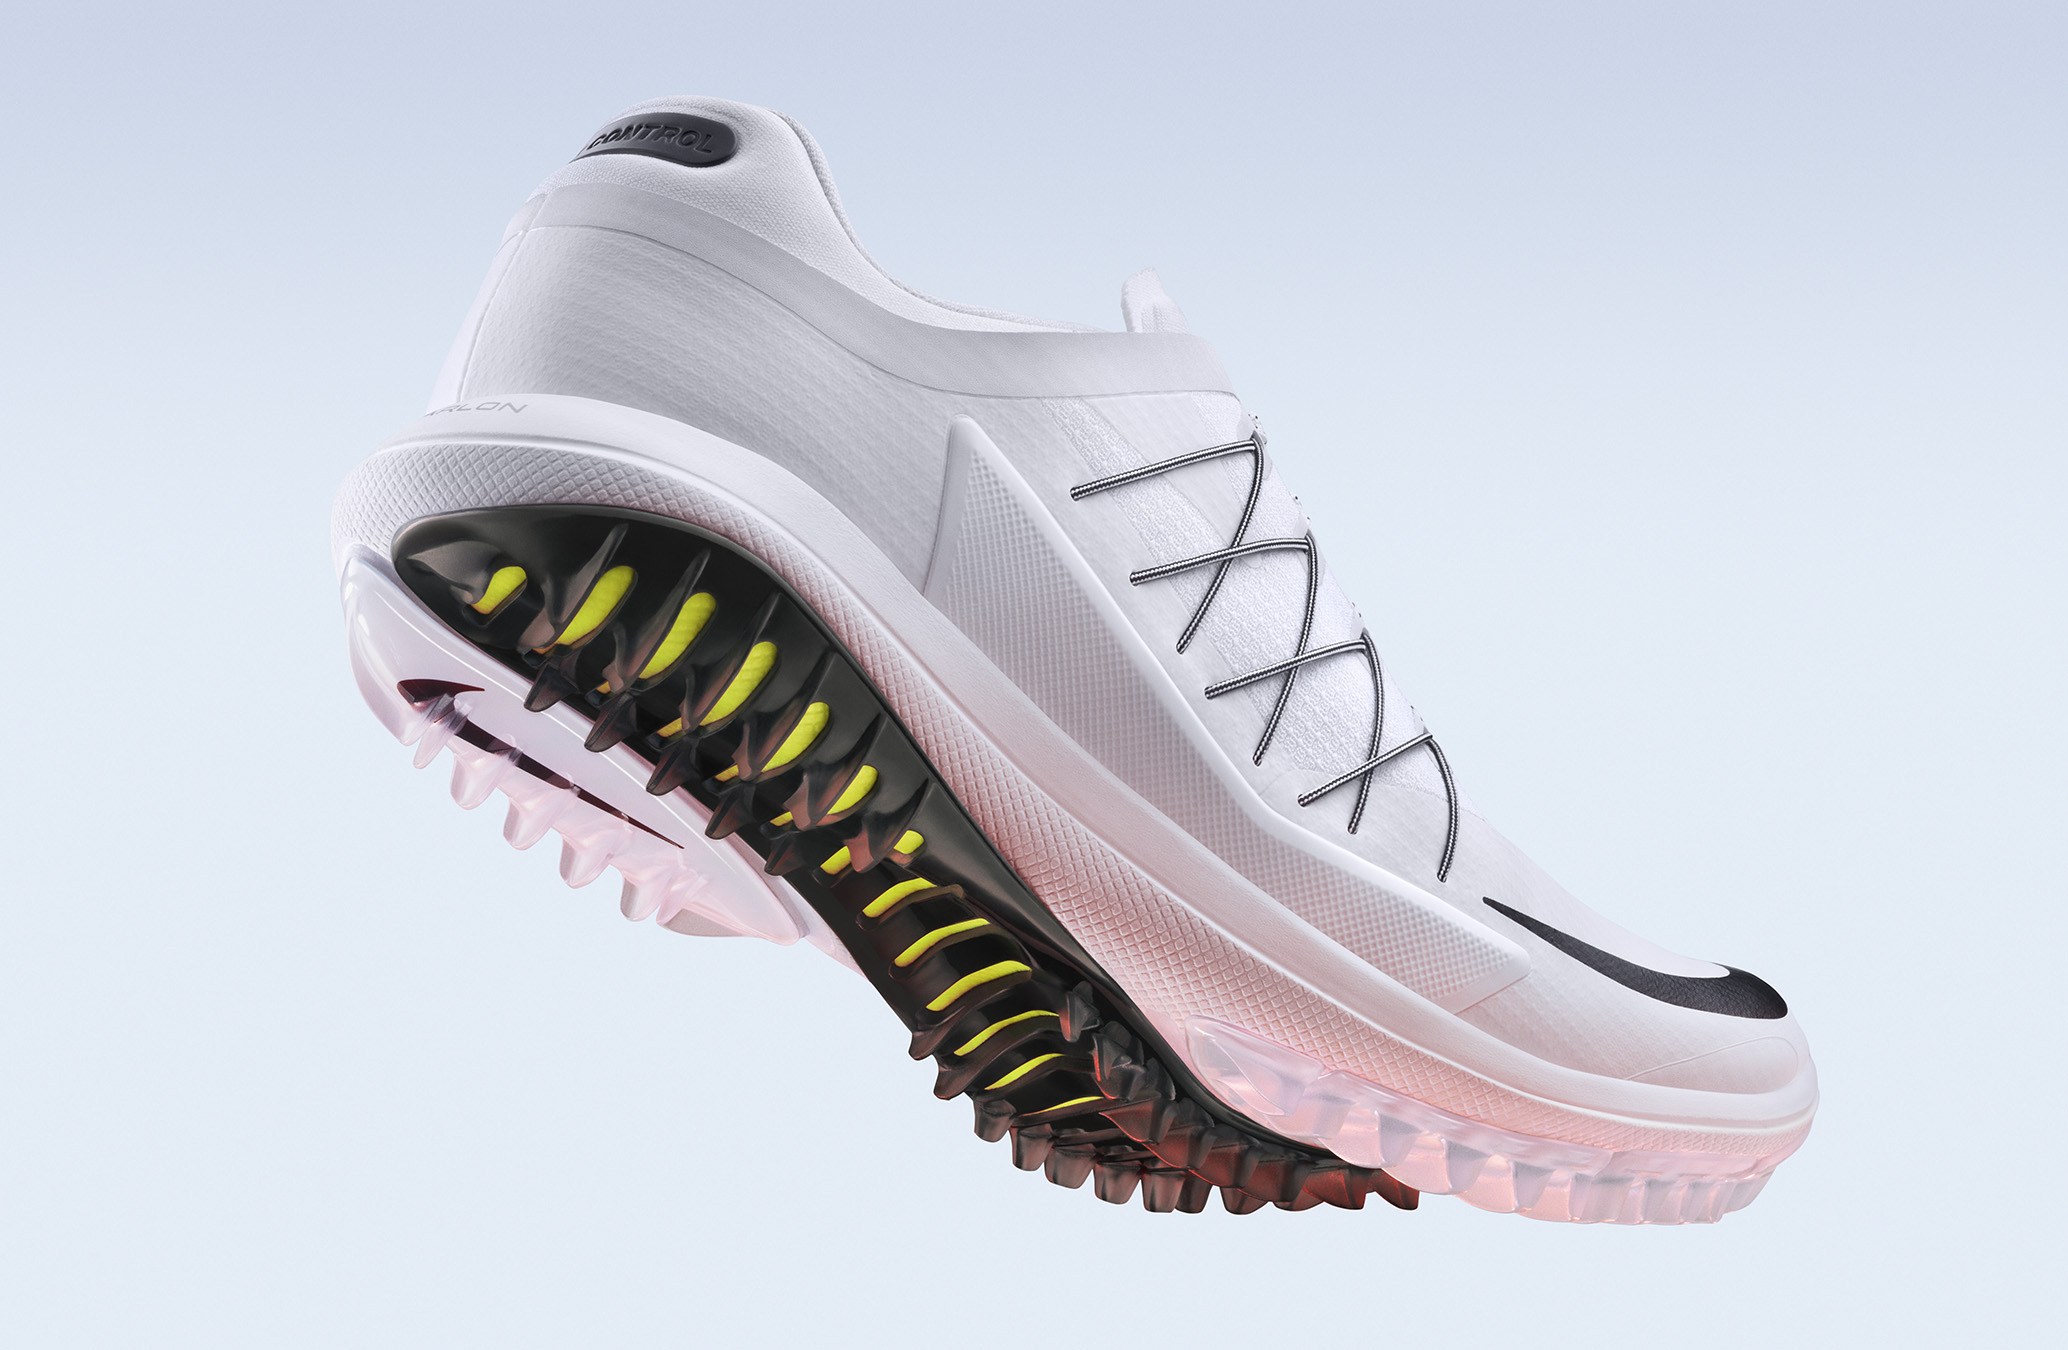 Storen kolonie Grappig Rory McIlroy debuts new spikeless Nike Lunar Control Vapor shoes at the  WGC-HSBC Champions | This is the Loop | Golf Digest